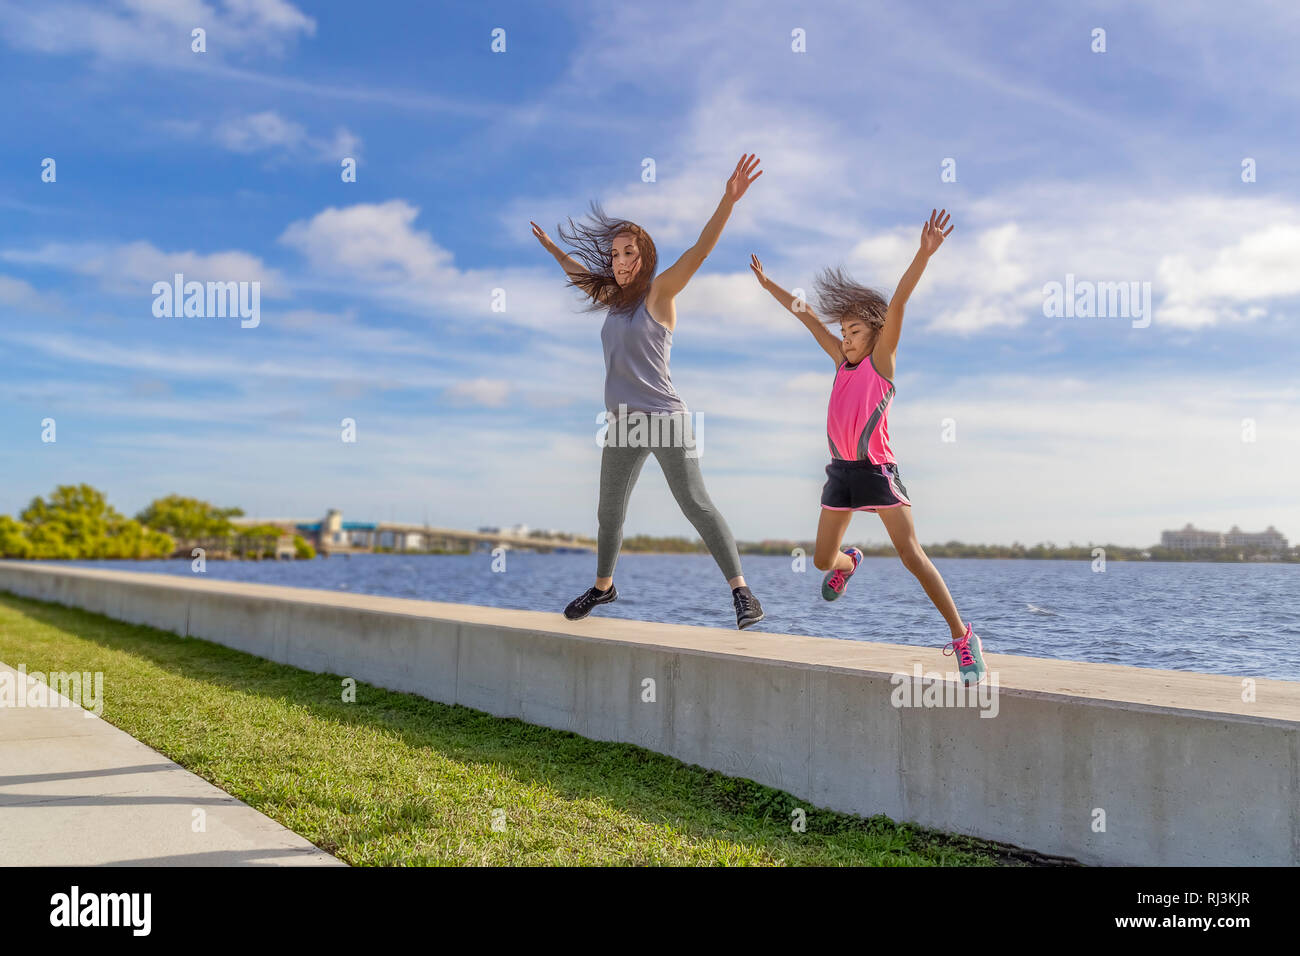 Mother and daughter jump together from a seawall on a bright sunny day. Stock Photo